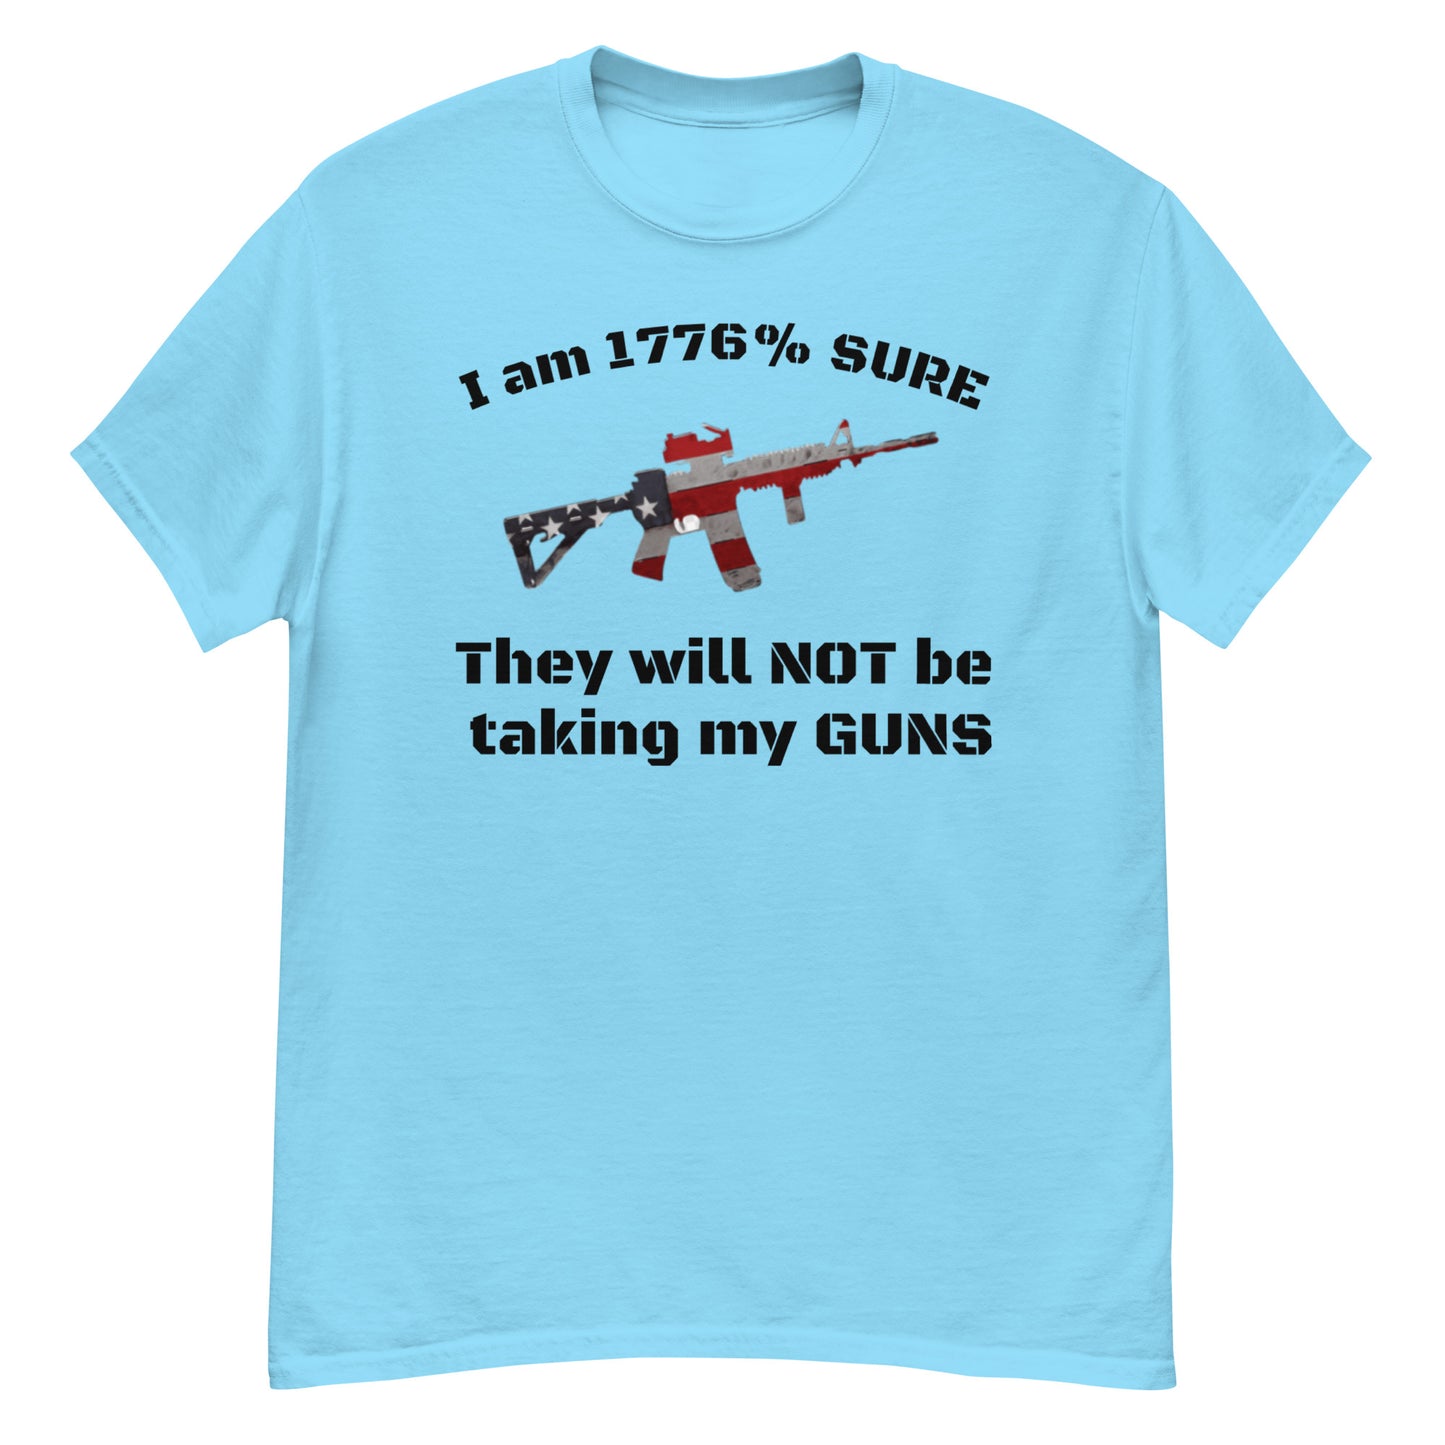 I am 1776% sure they will not be taking my guns classic tee (black lettering)